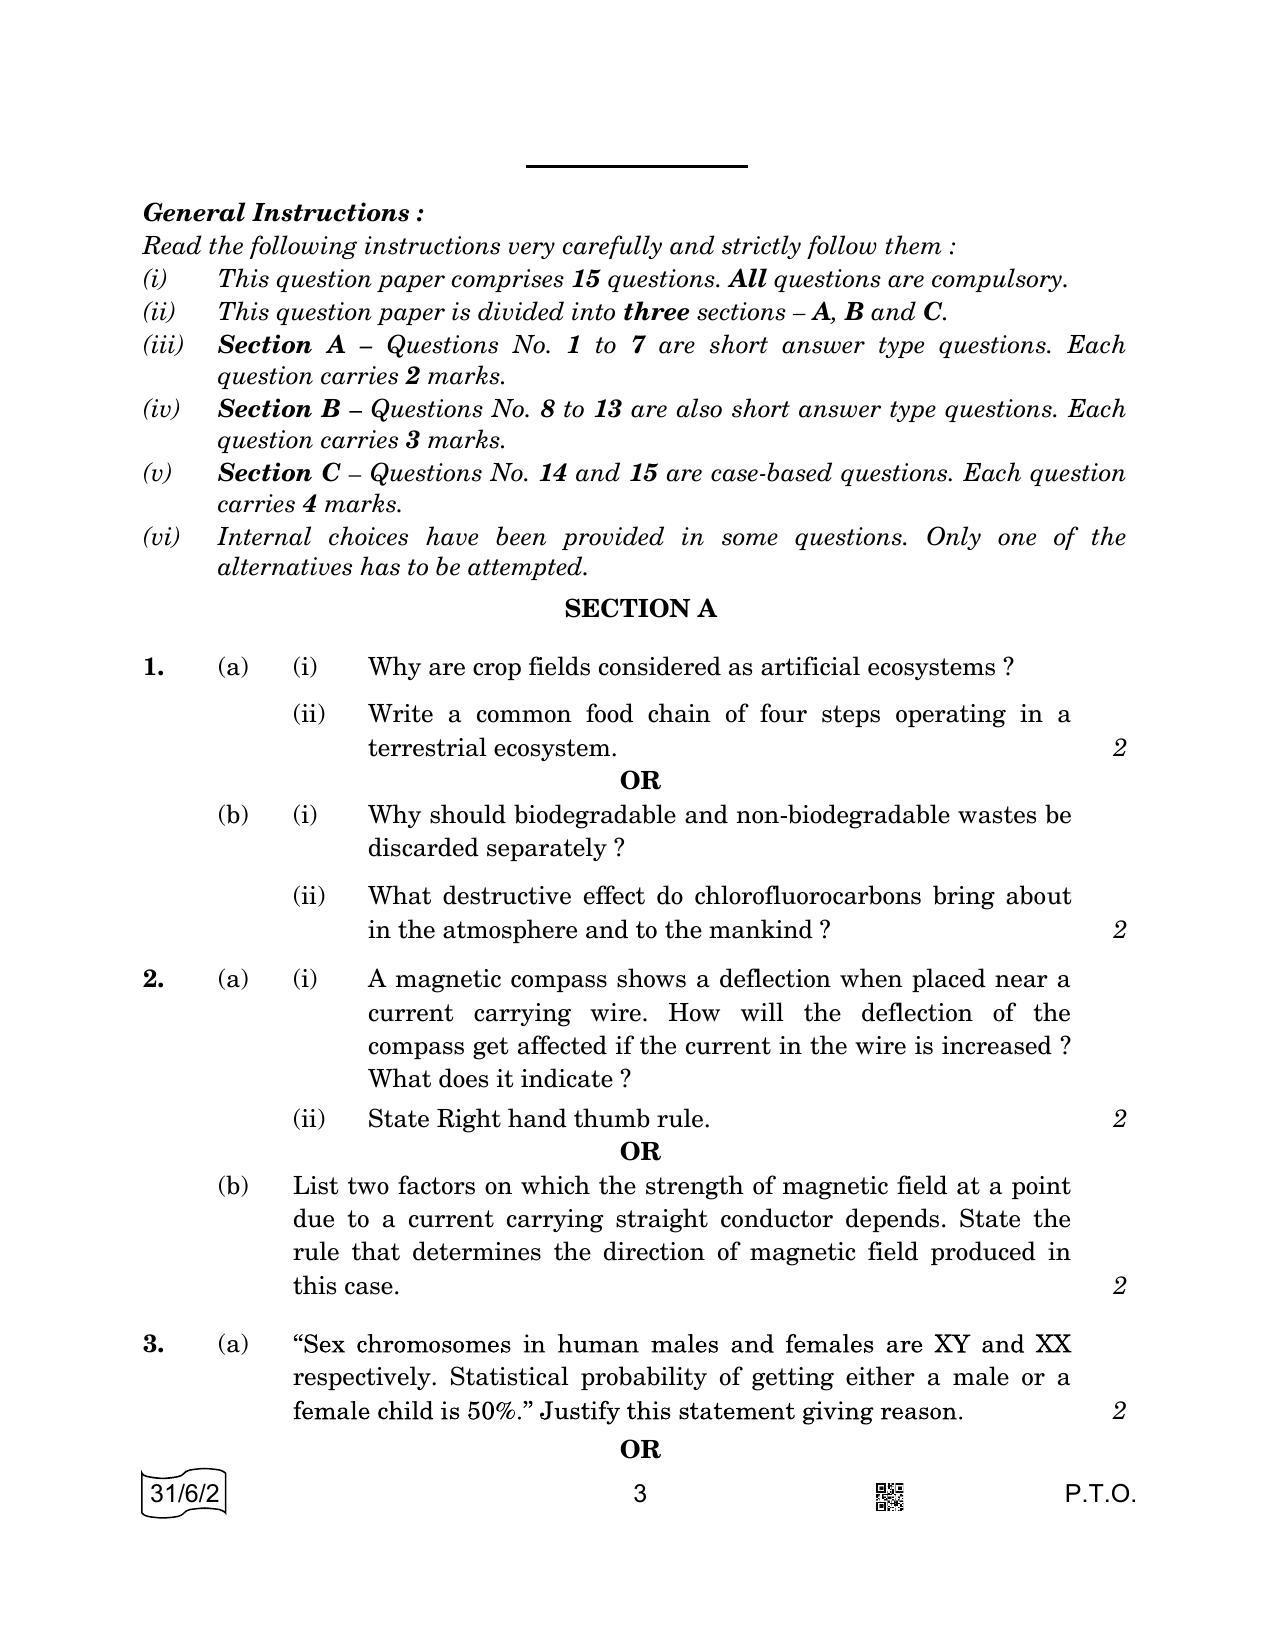 CBSE Class 10 31-6-2 SCIENCE 2022 Compartment Question Paper - Page 3